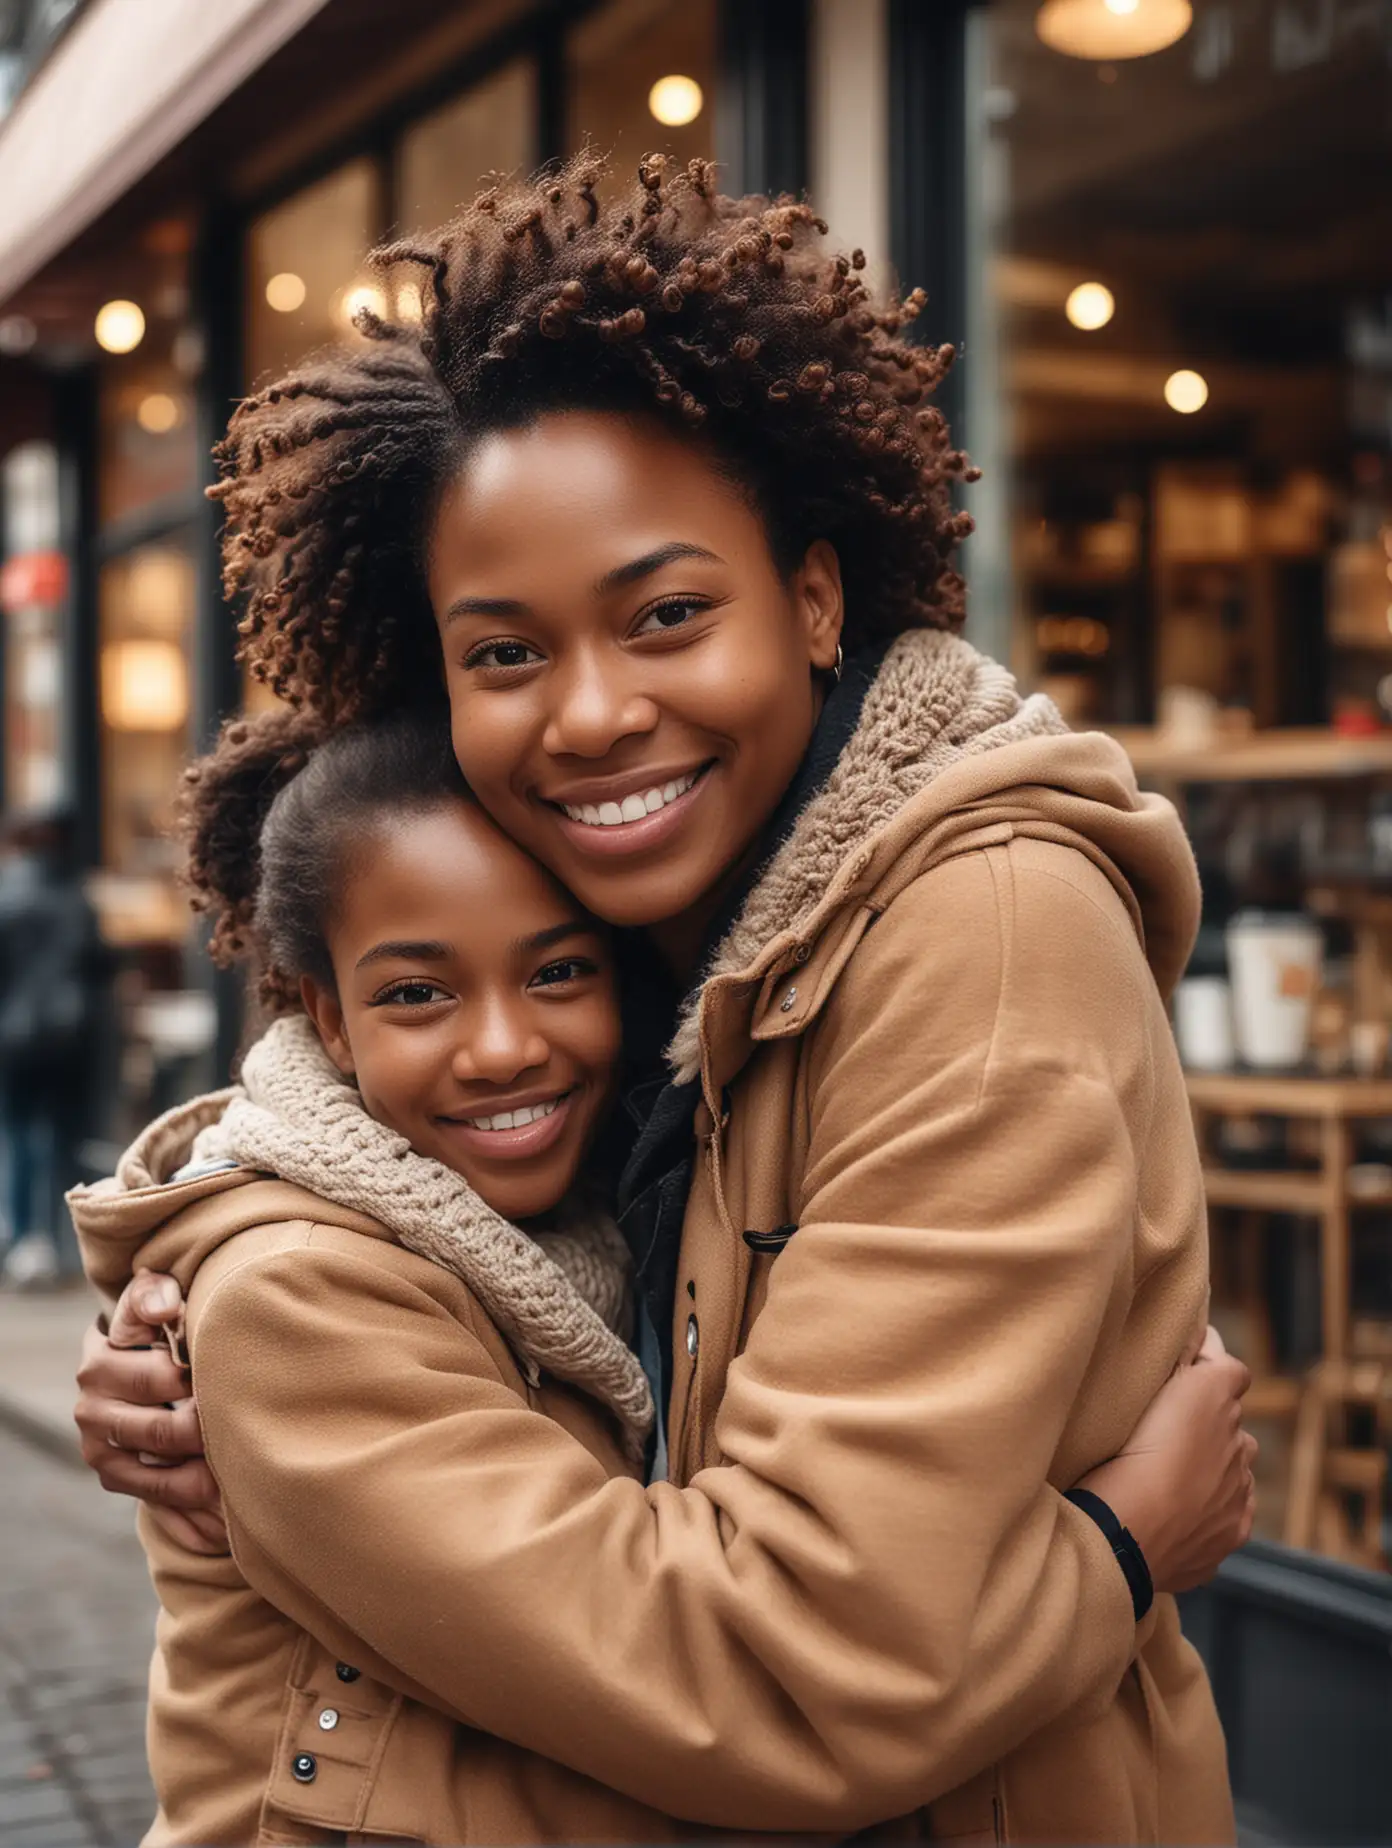 Photo of a happy black mother and daughter hugging in front of a coffee shop, wearing winter during outdoor shopping on an autumn day. Taken with a Canon EOS R5 camera and standard lens, with a shallow depth of field focusing on their faces against a blurred background of a busy street scene